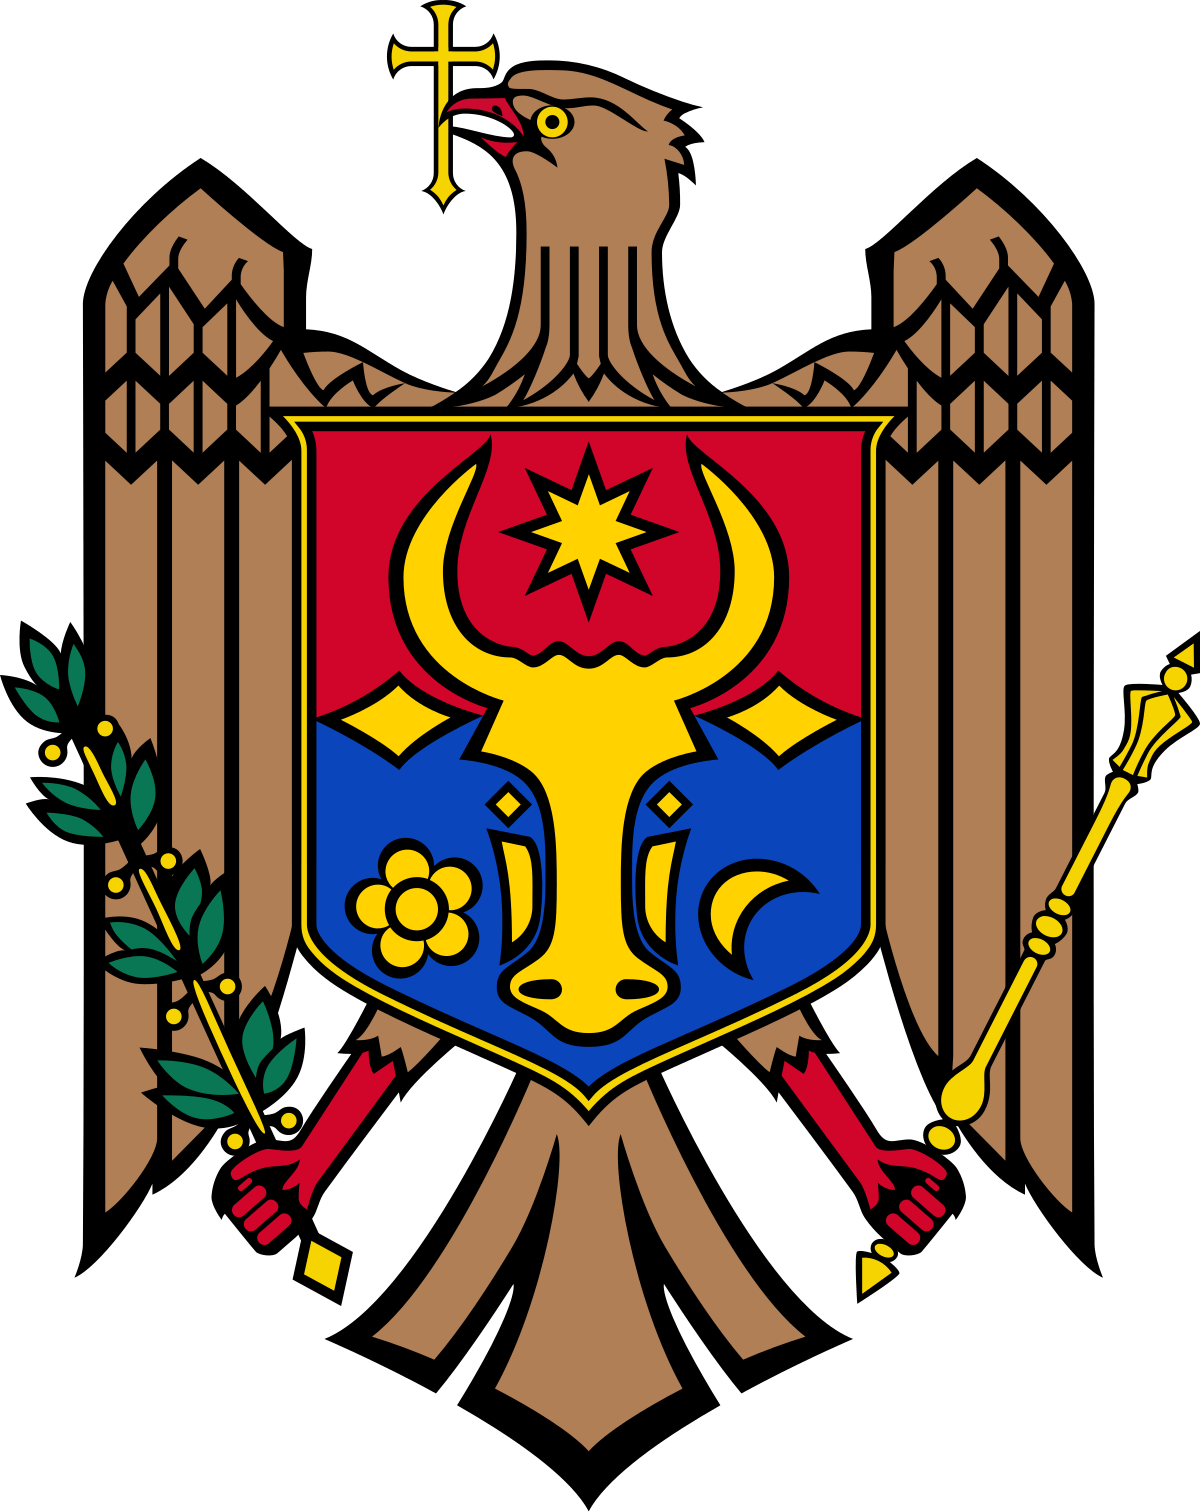 Coat of arms of the Republic of Moldova.